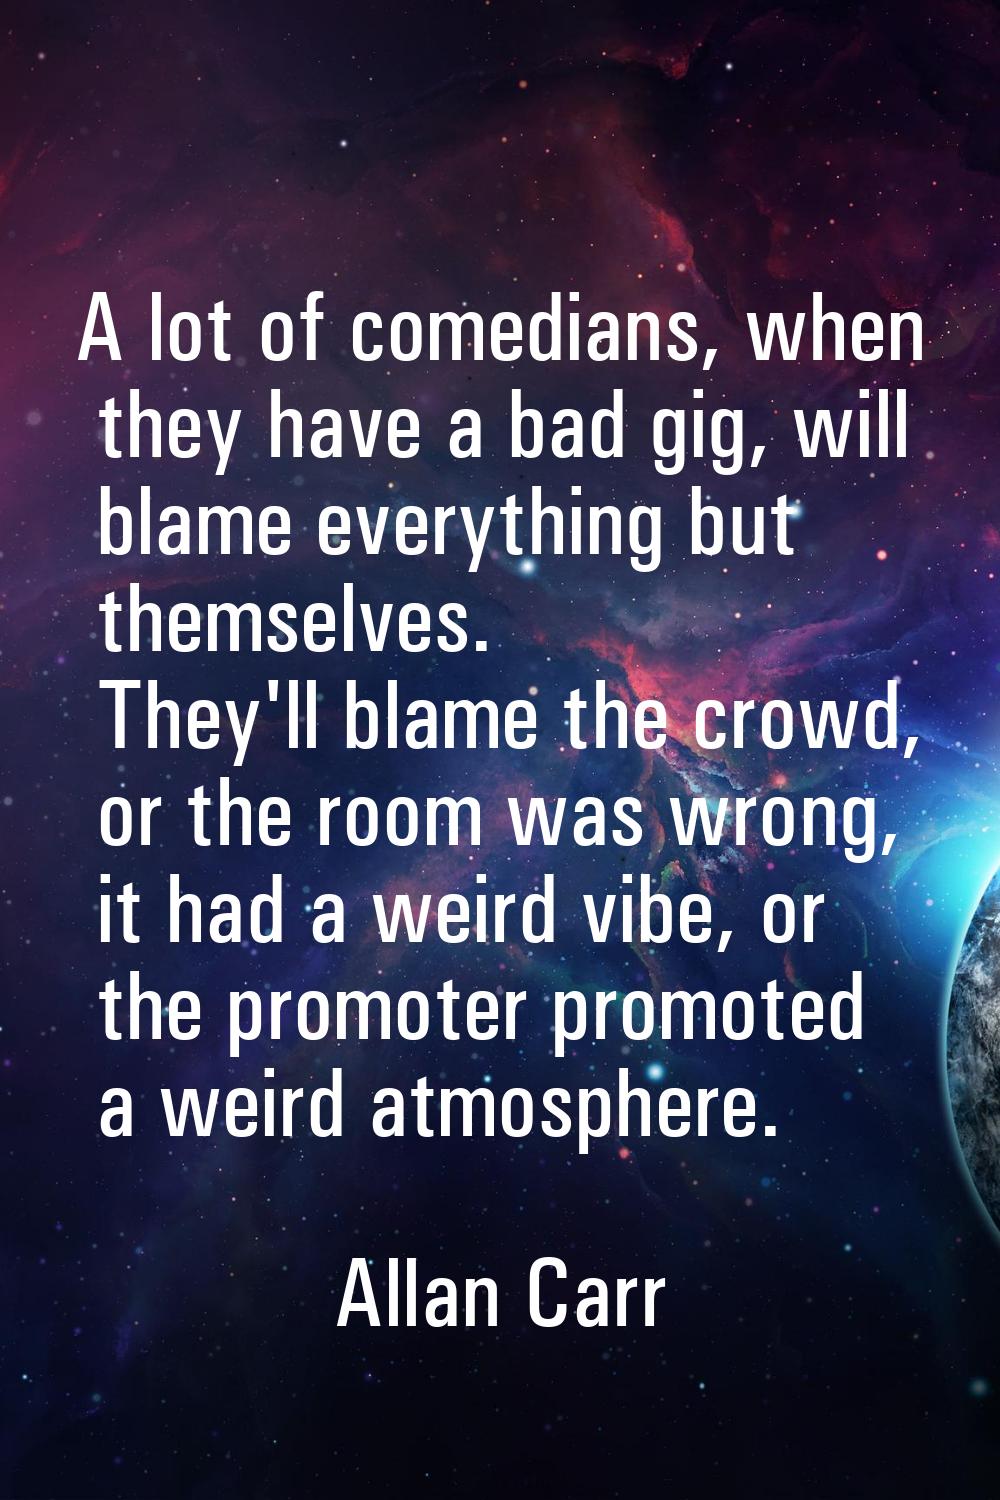 A lot of comedians, when they have a bad gig, will blame everything but themselves. They'll blame t